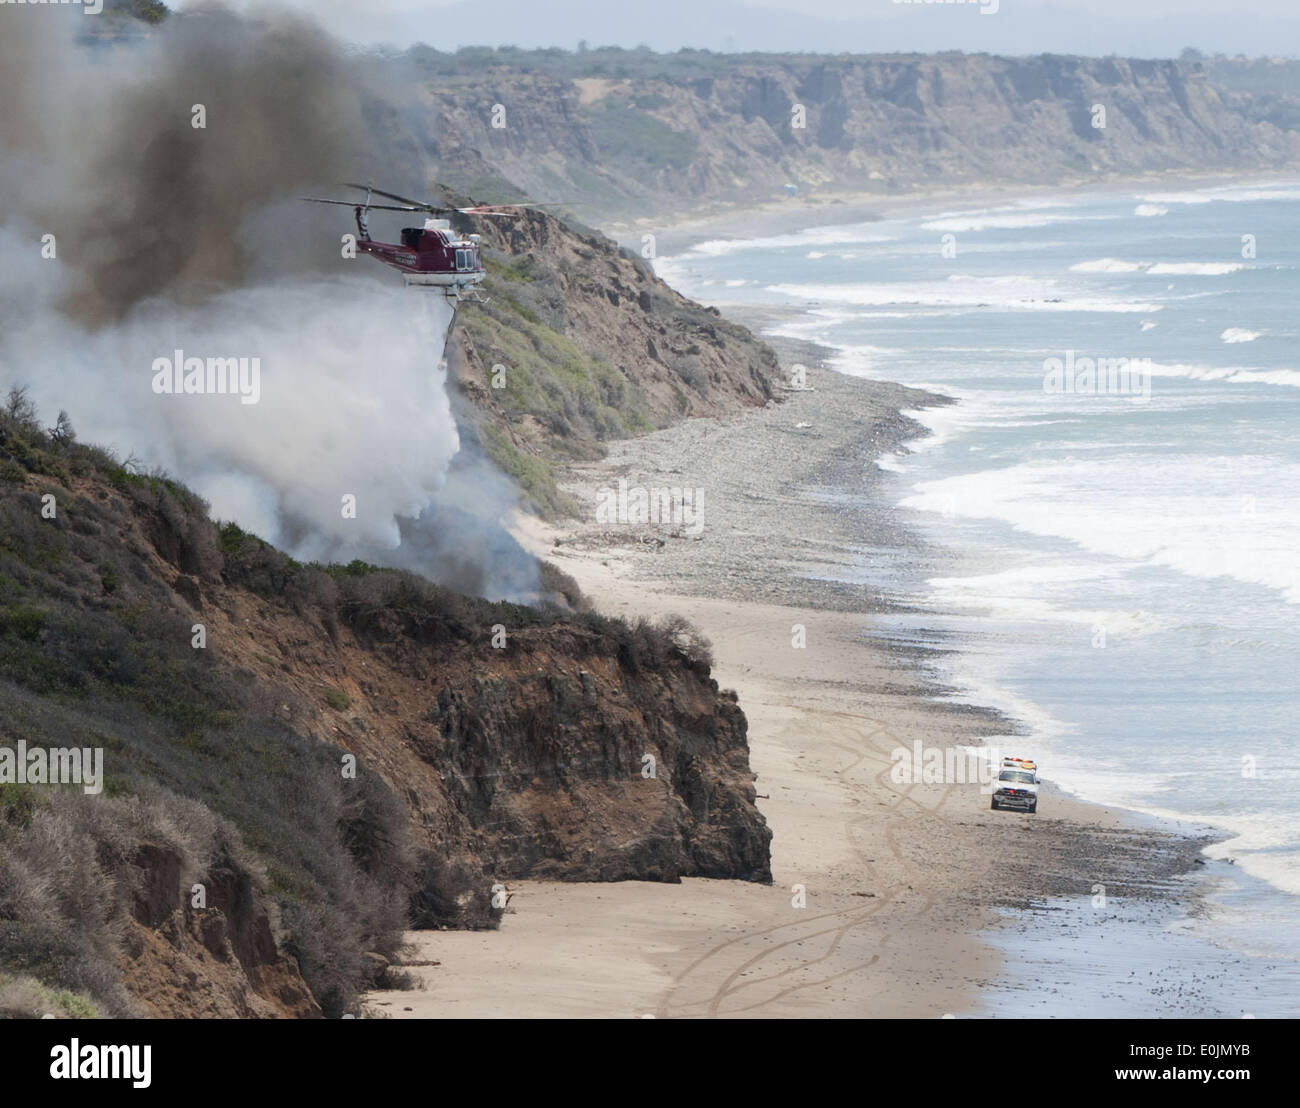 San Onofre, California, USA. 13th May, 2013. A California State Lifeguard jeep makes its way past a flames burning along a bluff area just above the water's edge near Trail One at San Onofre State Campground on Wednesday morning as a waterdropping helicopter drops a load of ocean water on the fire. Multiple Fire agencies, including Federal, State and County, responded to a wildfire on at the San Clemente Check Point that began when a truck on the northbound I-5 Freeway caught fire and passed to nearby vegetation on Wednesday morning. The Pendleton West Fire, had north and south bound traffic Stock Photo